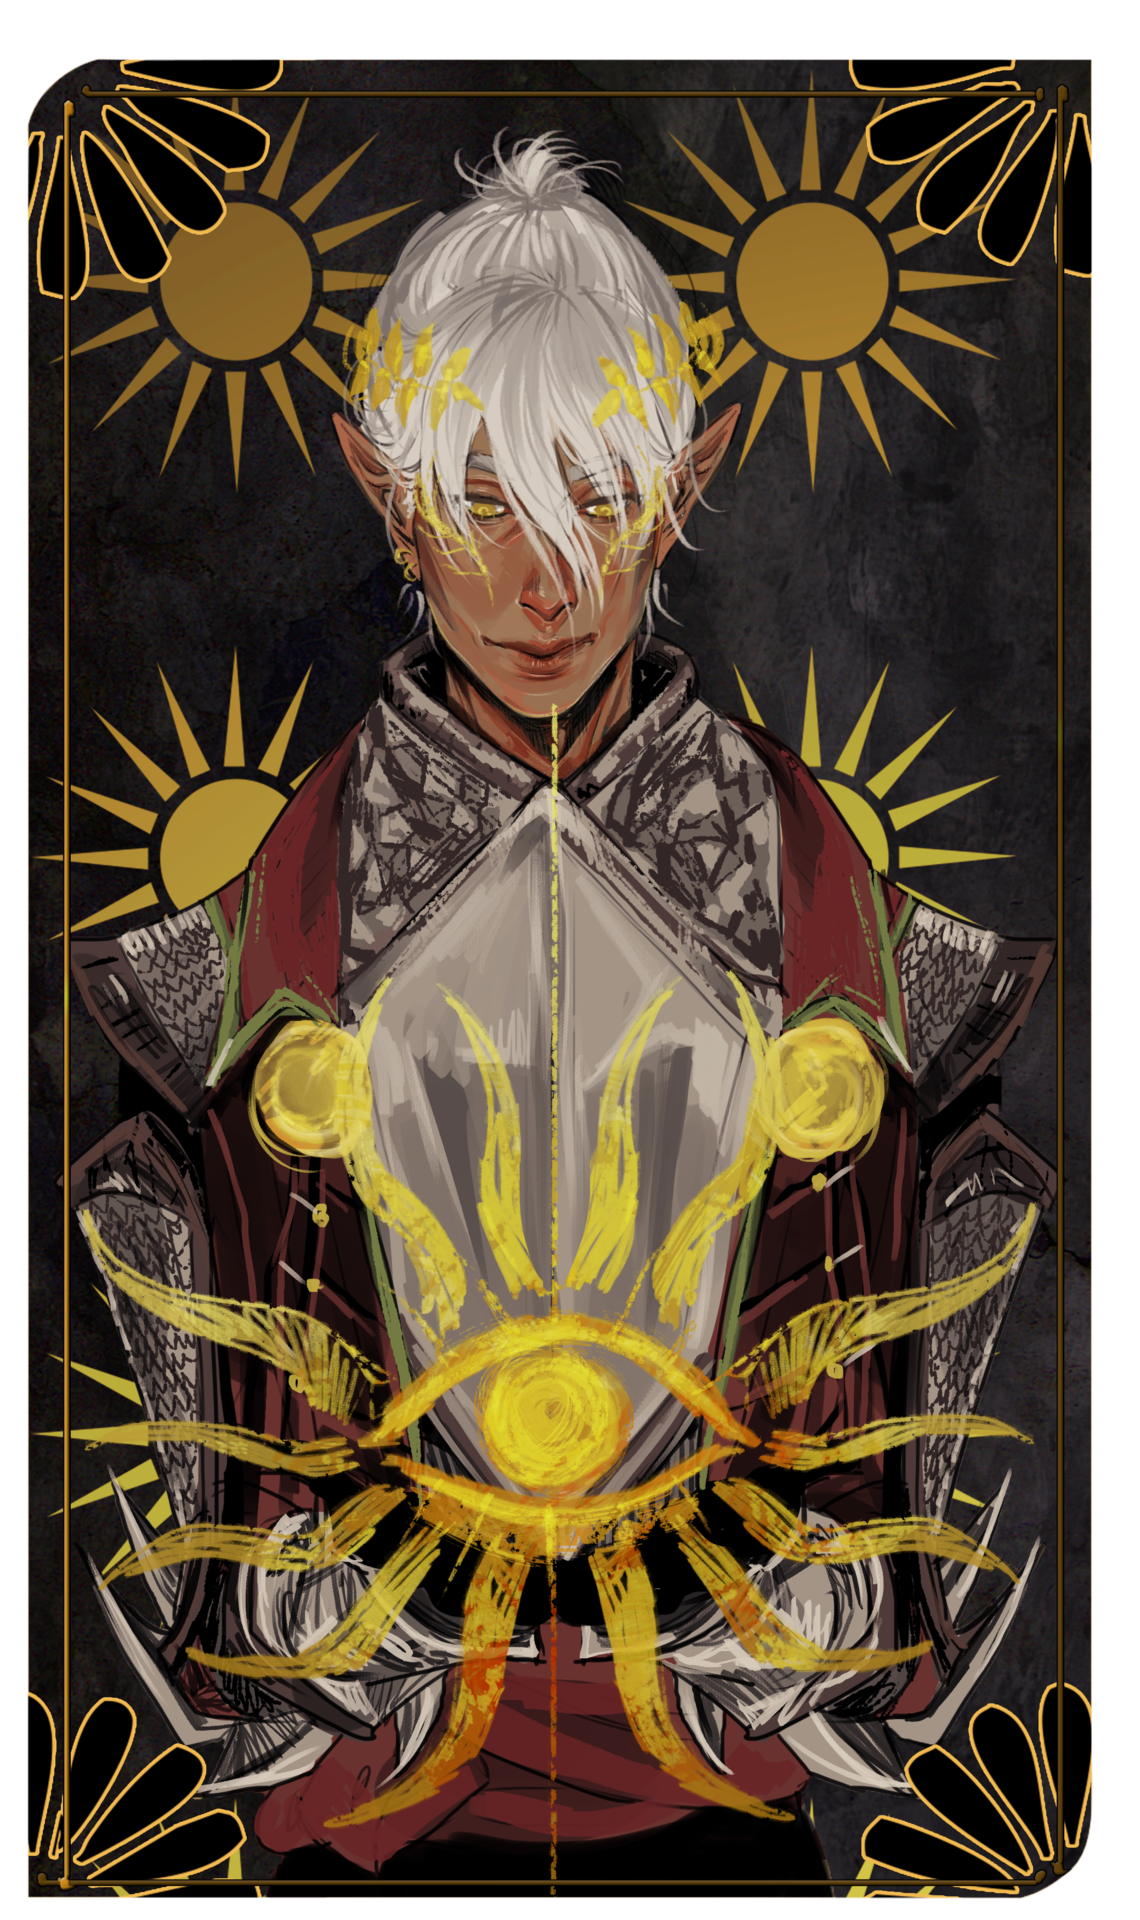 And finished. Aeris Lavellan as The Sun, commissioned by @vhenhan. ☀️ Patreon.com/Krovav